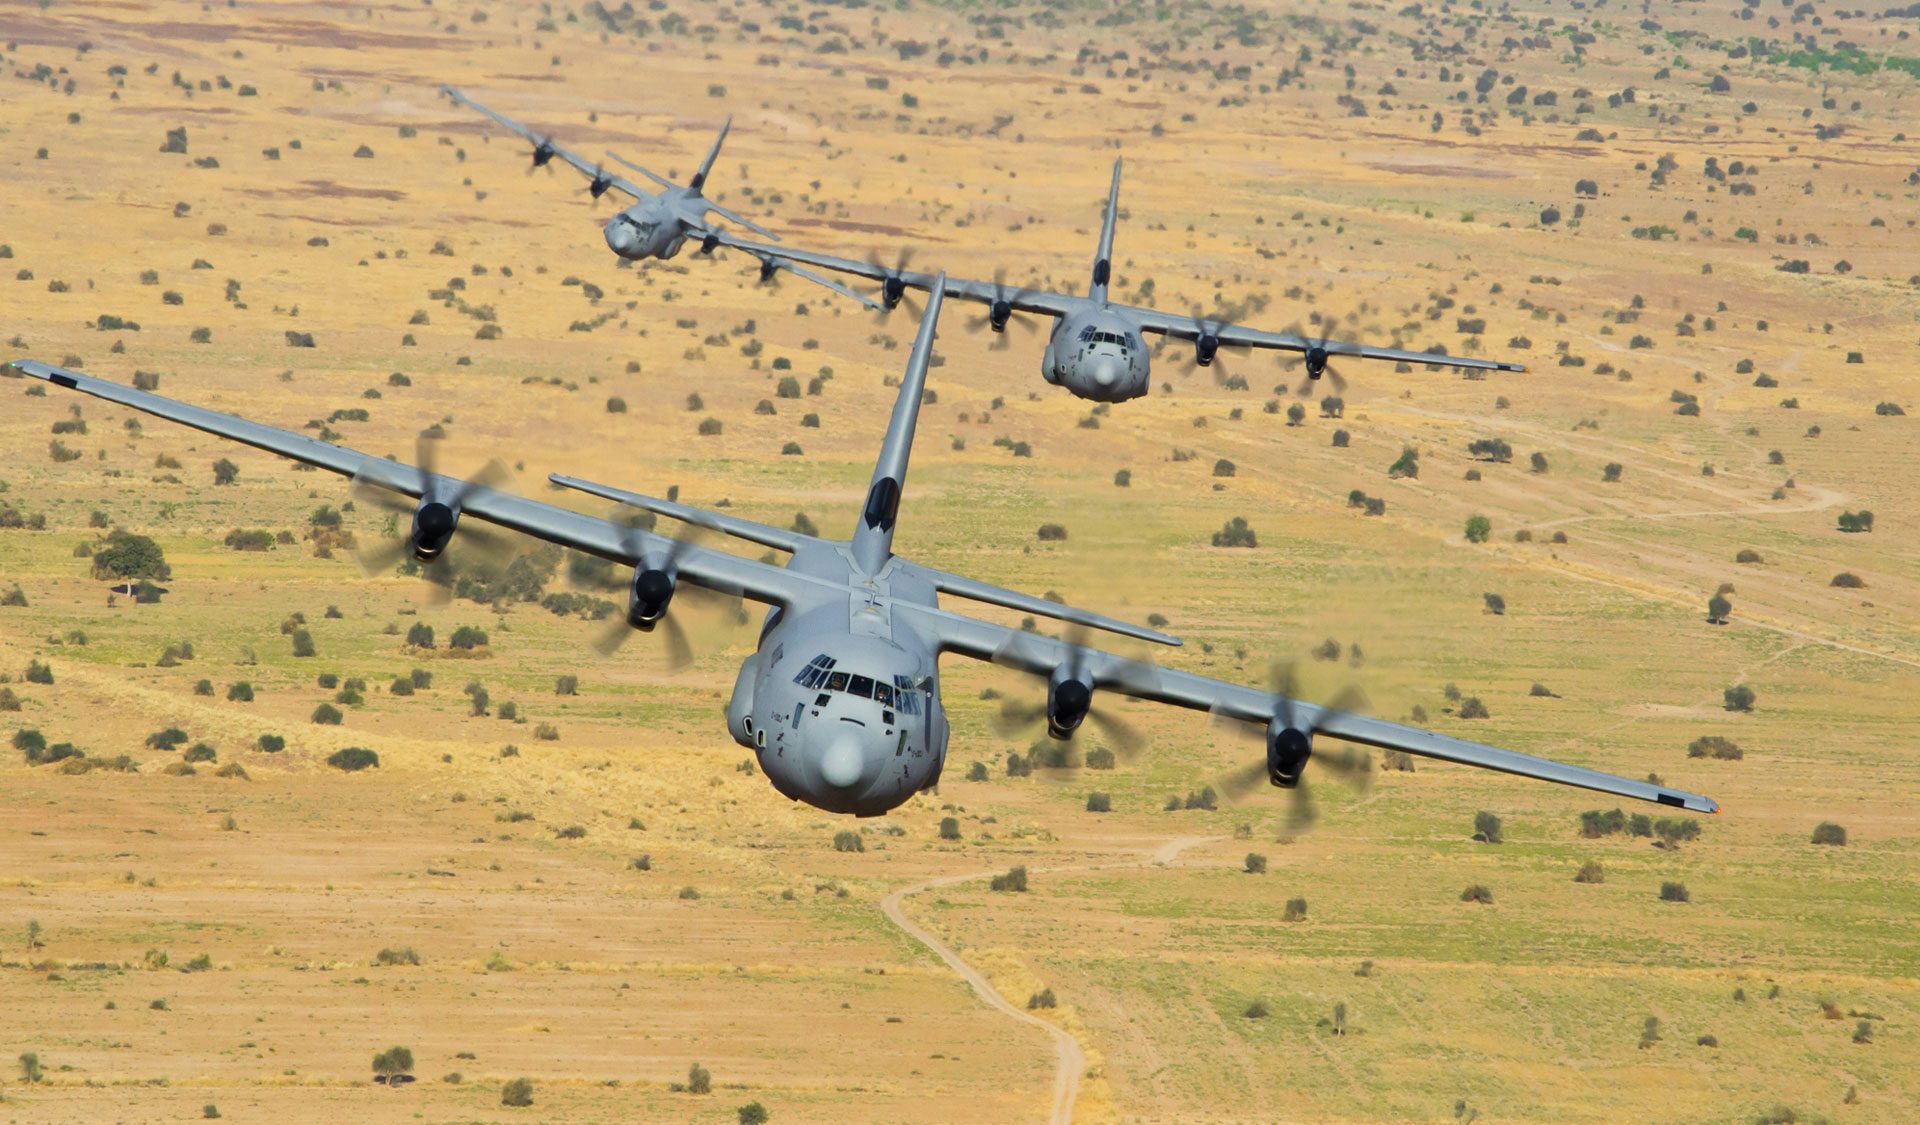 Philippine Approved Acquisition of 5 C-130J Super Hercules Military Transport Aircraft